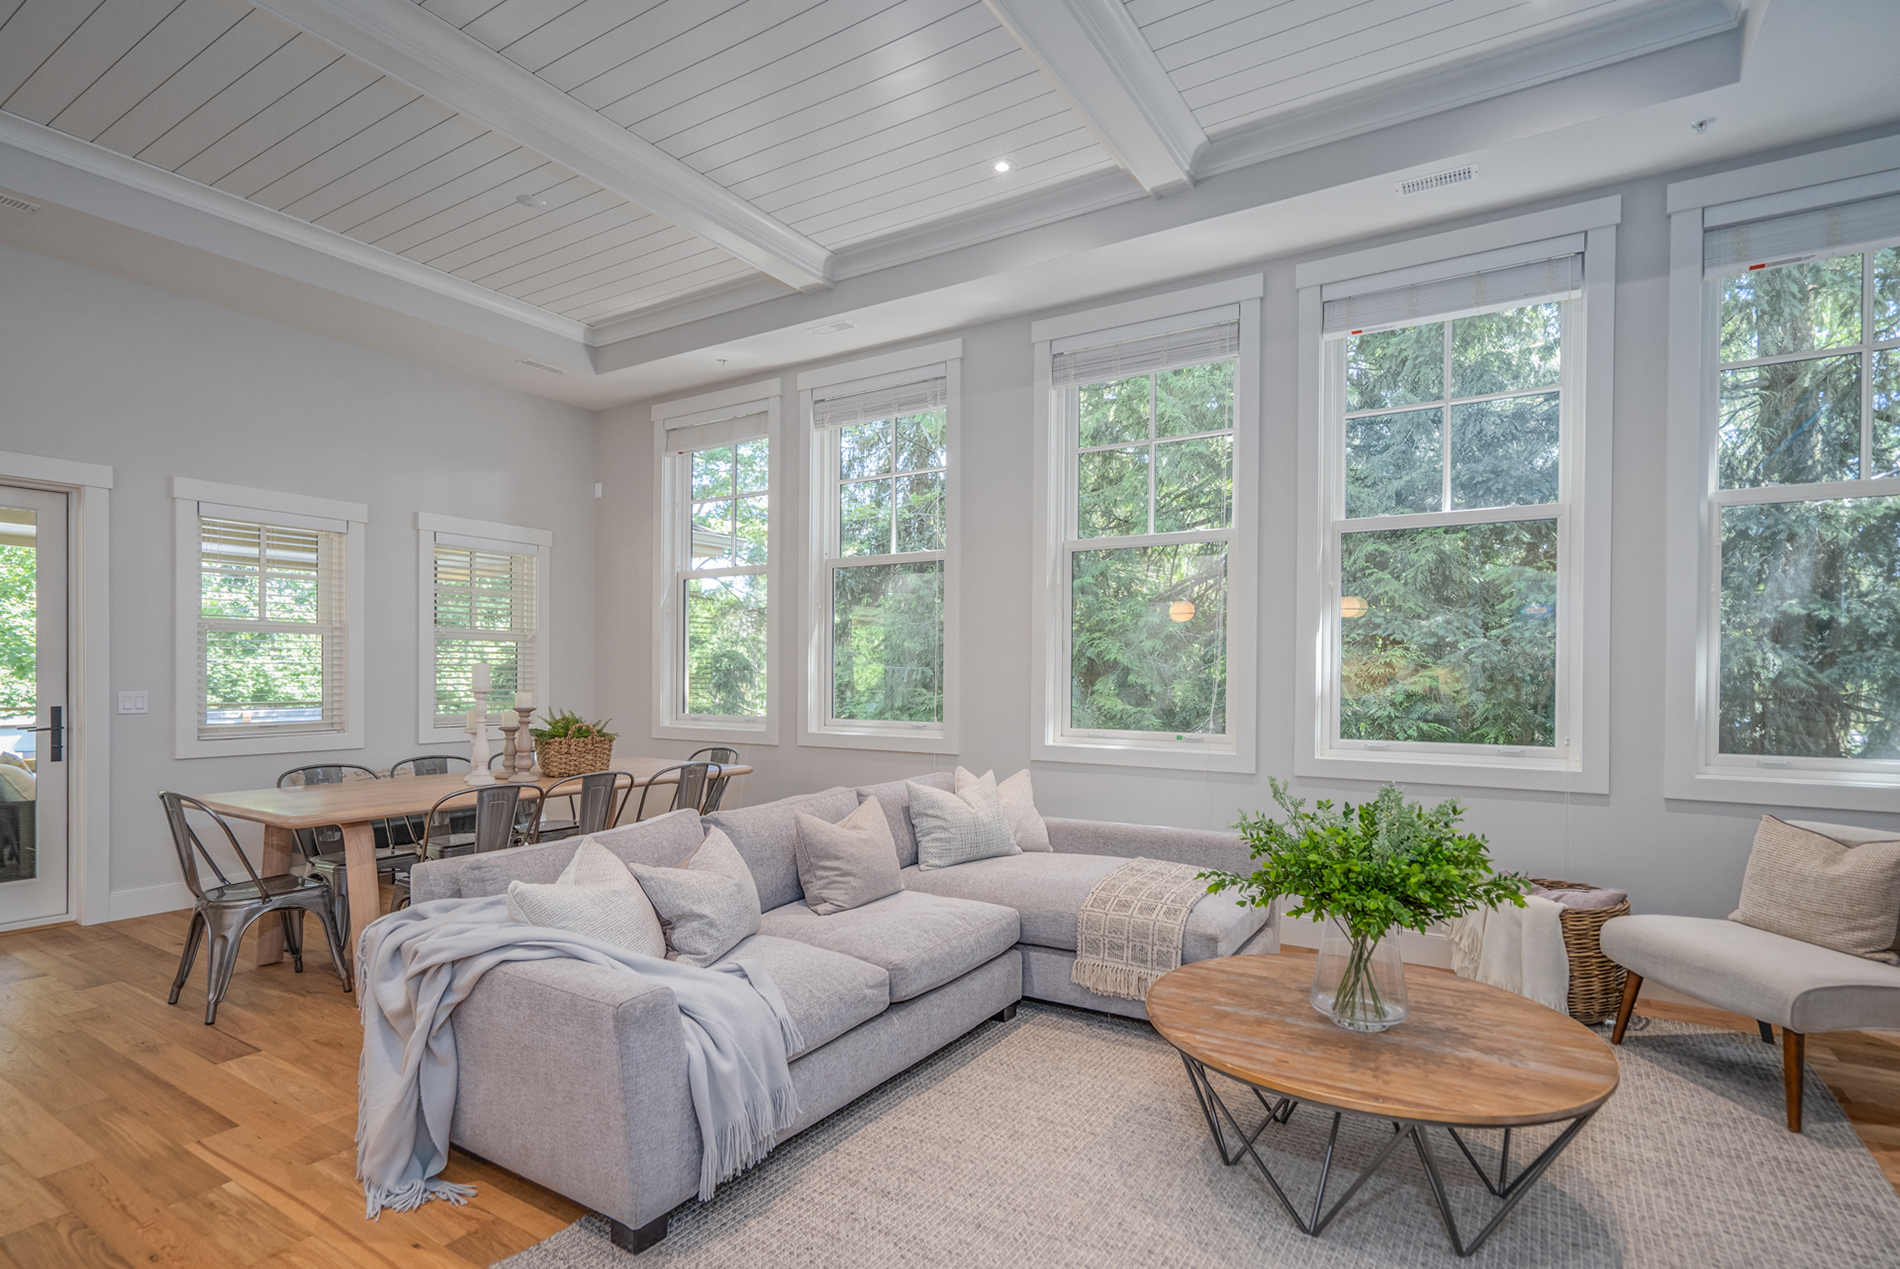 Traditional style living room with west coast elements in a heritage home that has white classic vinyl windows by Centra